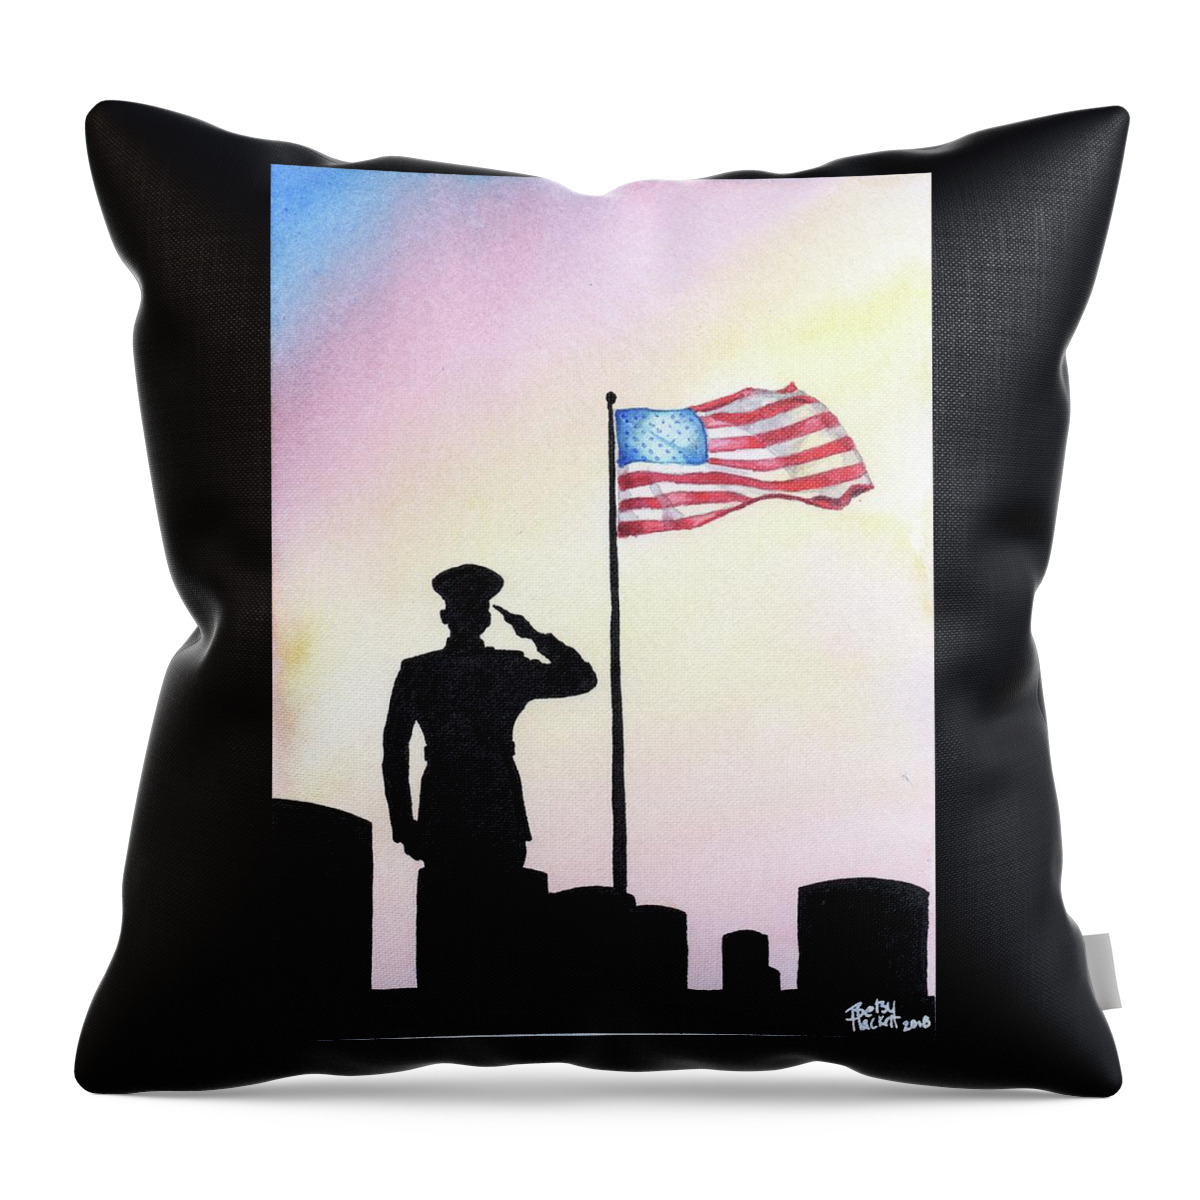 Memorial Day D D-day Normandy Battle Cemetery Graveyard Flag Flying Salute Tombstone Death Honor Commitment Sacrifice Ultimate Remember Remembrance We Watercolor Ink Signed Betsy Hackett Elizabeth 2018 Sunset Integrity Veteran Sacrificed Infamy Lives Usmc Marines Oohrah Marine America American Merica Flag Cemetary Murica Funeral Condolences Honors Military Somber Poignant Throw Pillow featuring the painting We Remember by Betsy Hackett